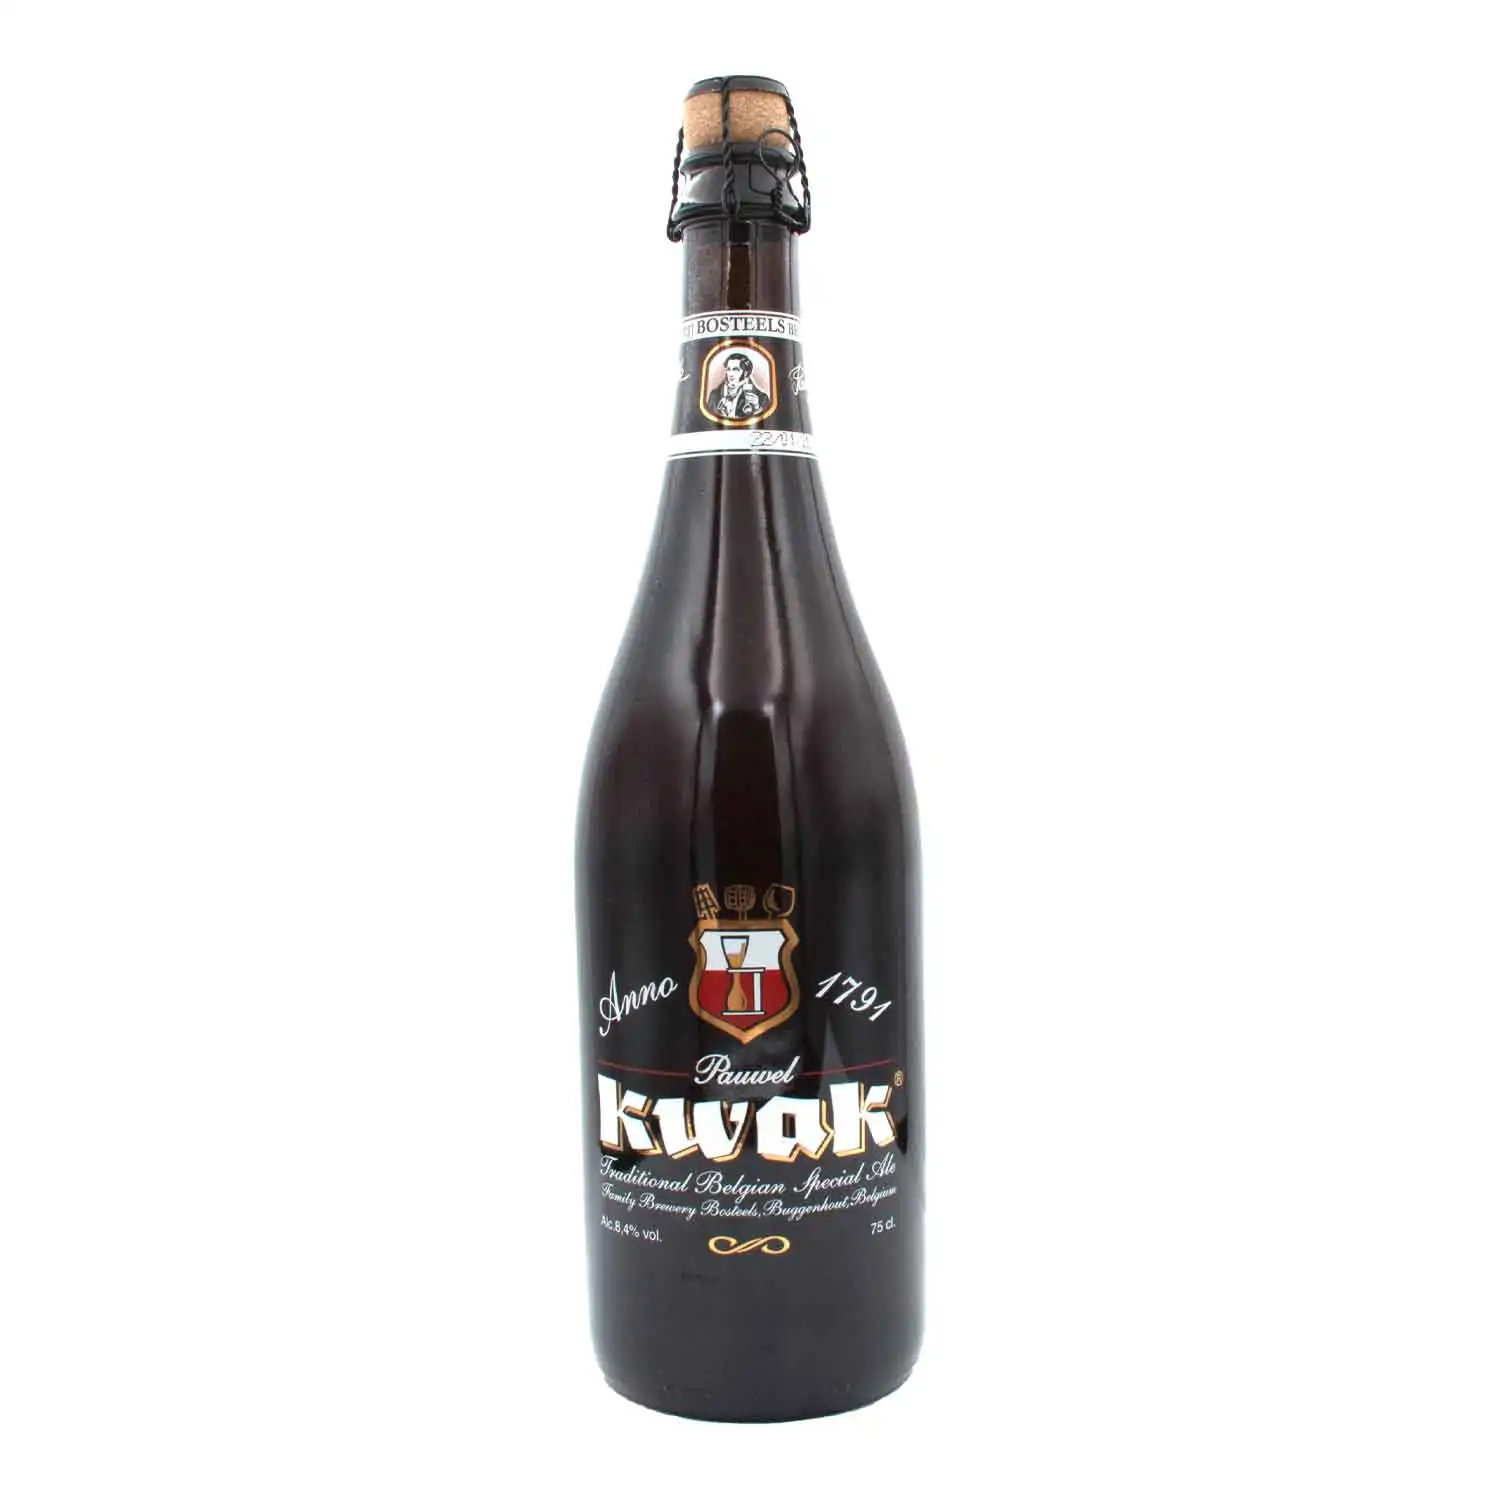 Kwak ambrée 75cl Alc 8,4% - Buy at Real Tobacco